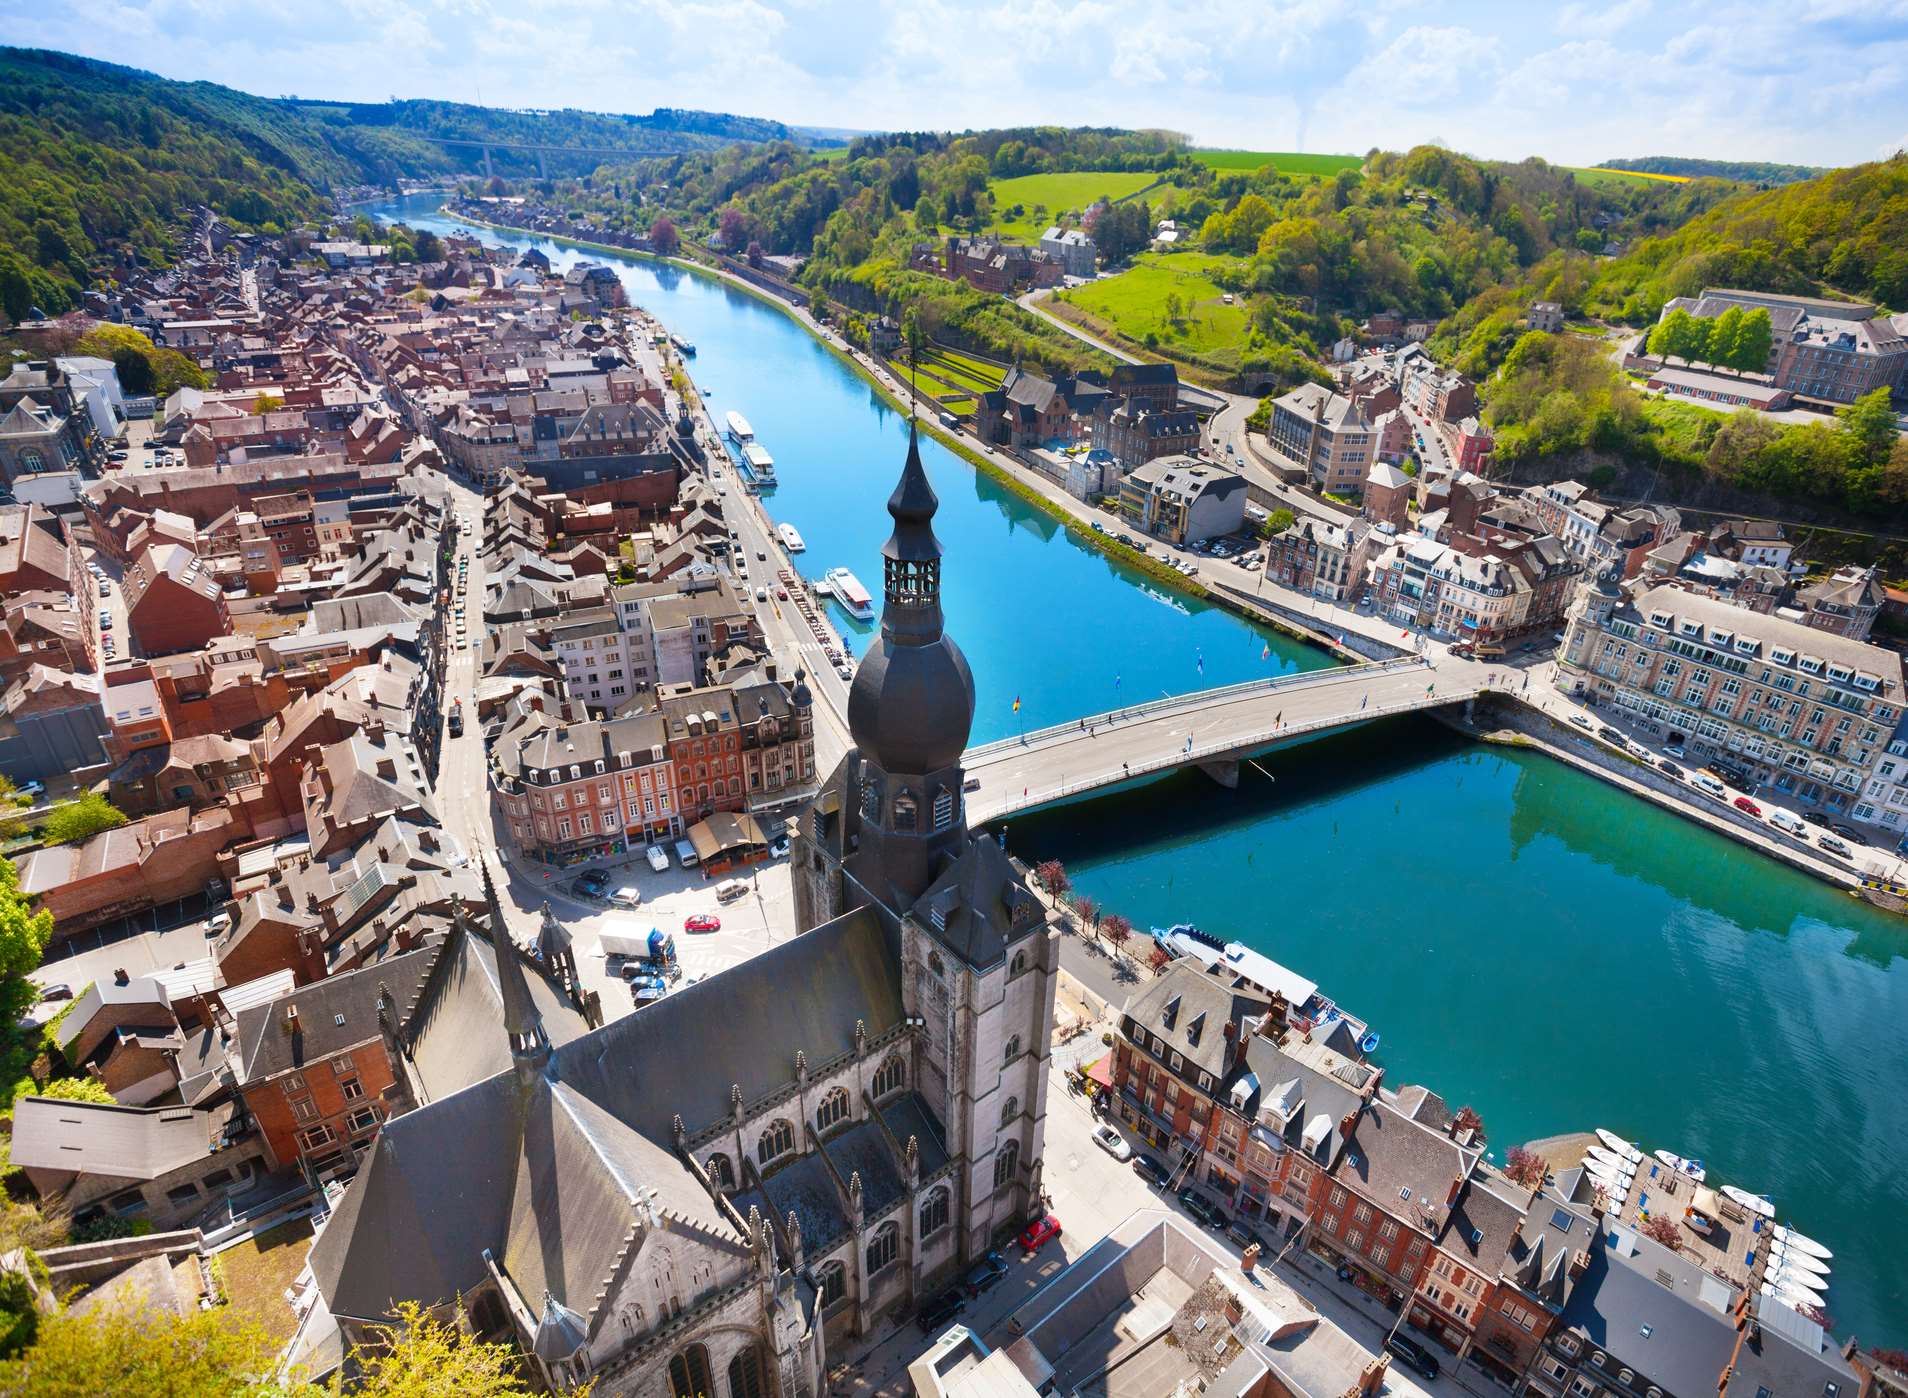 A bird's eye view of Dinant and the Pont Charles de Gaulle